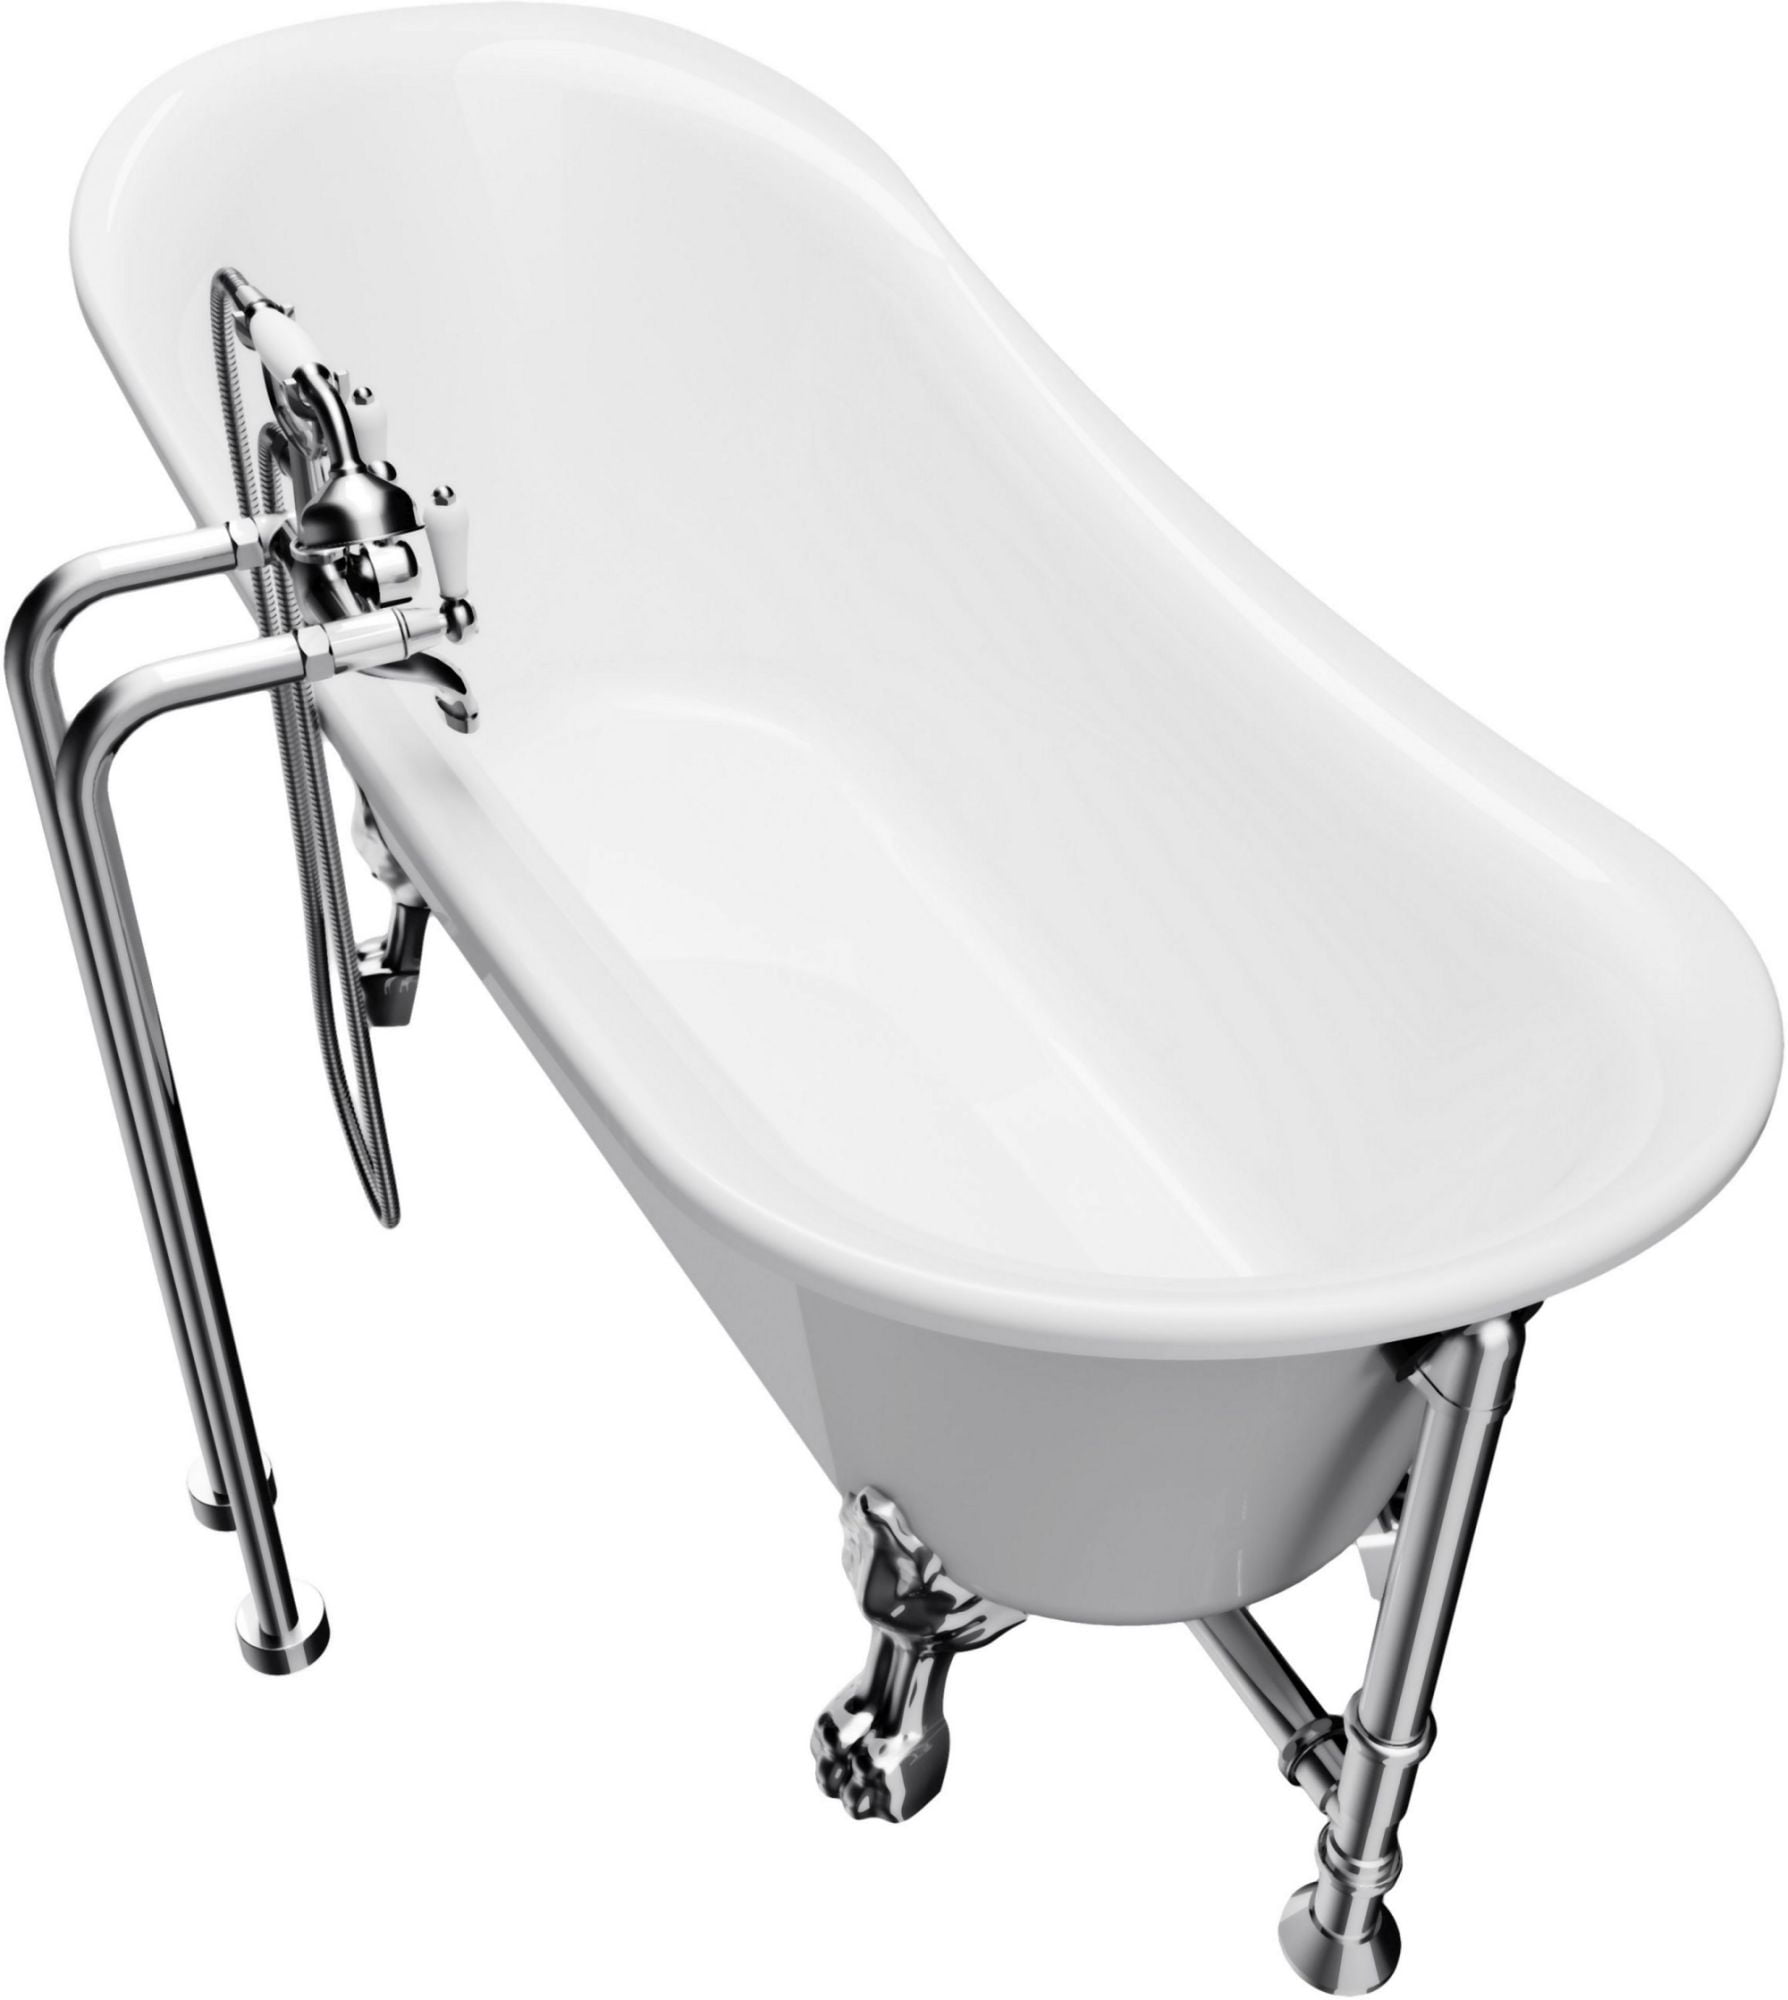 Picture of A&E Bath & Shower BT-830 69 in. Dorya Clawfoot Tub with Faucet